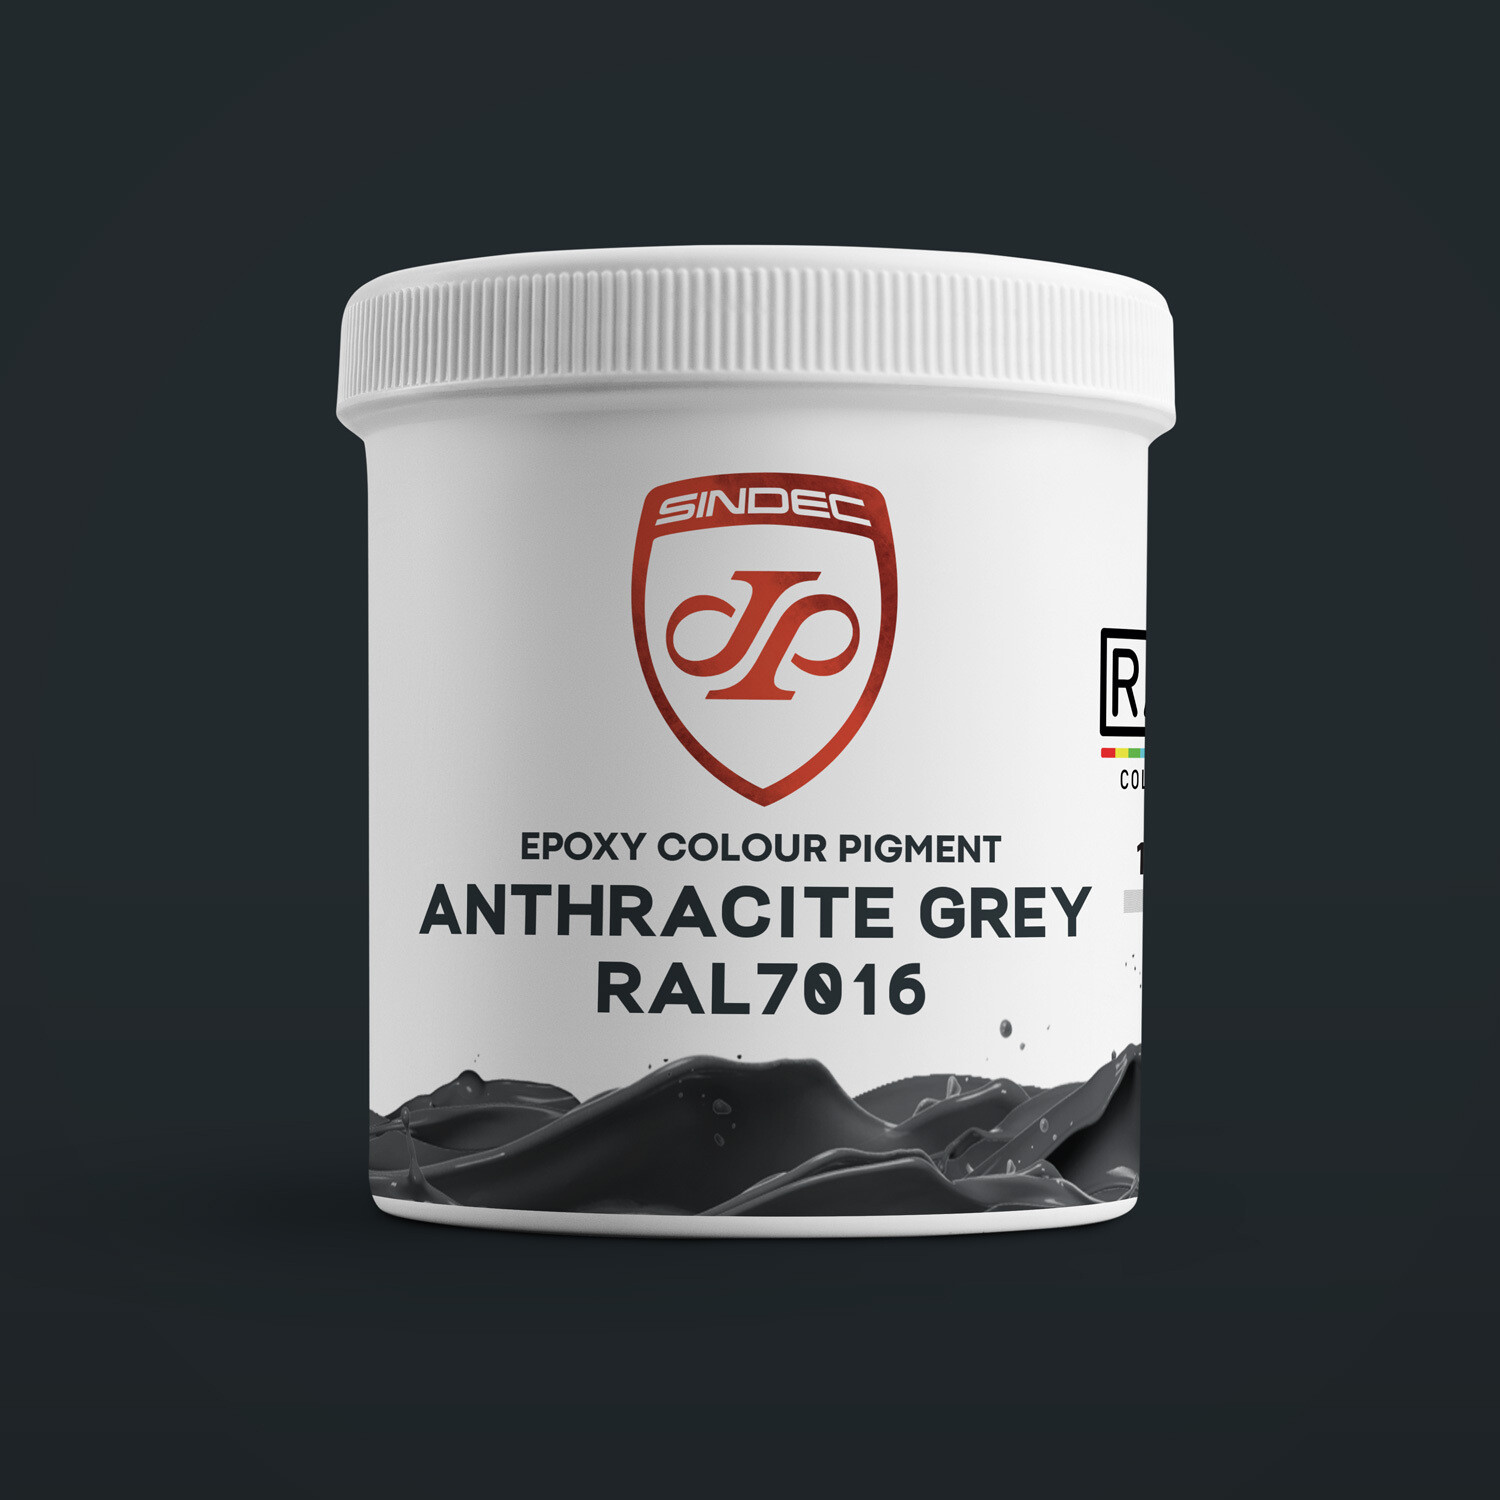 Anthracite Grey RAL 7016